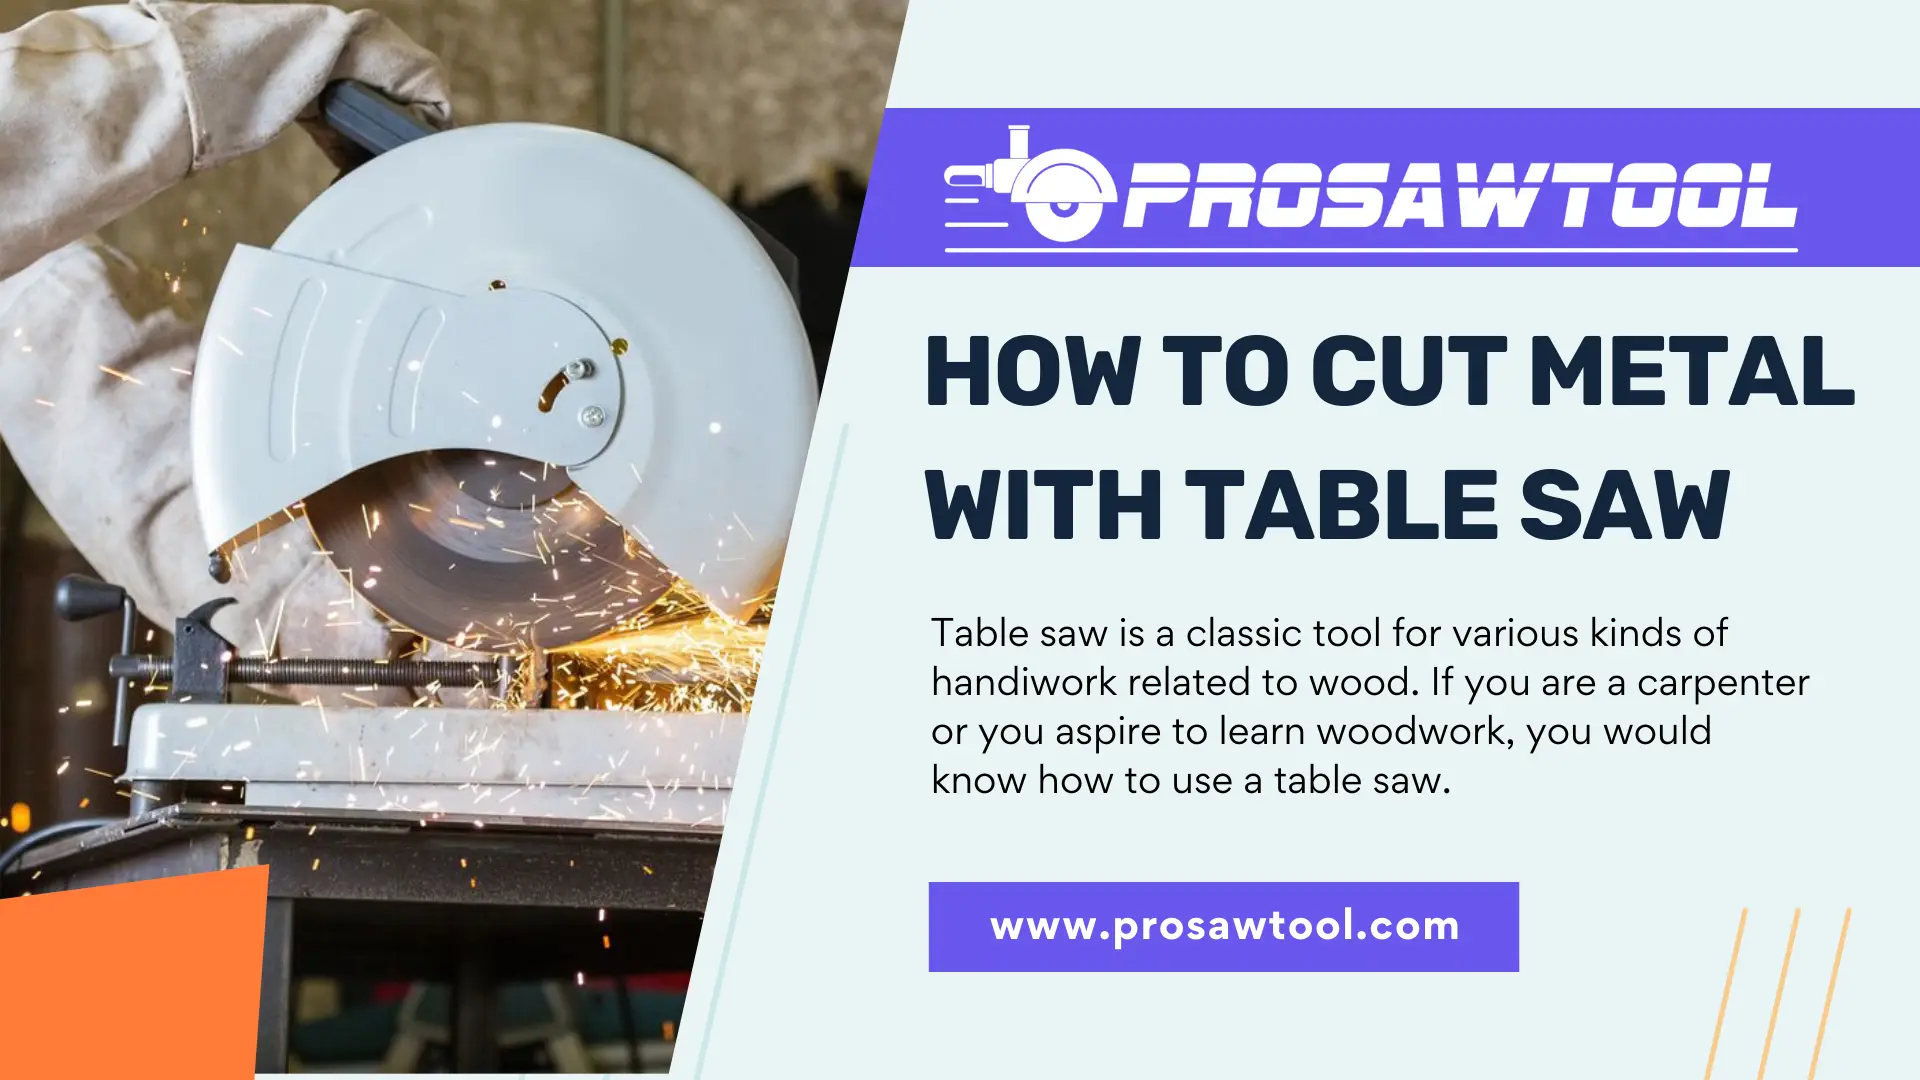 How to cut metal with table saw